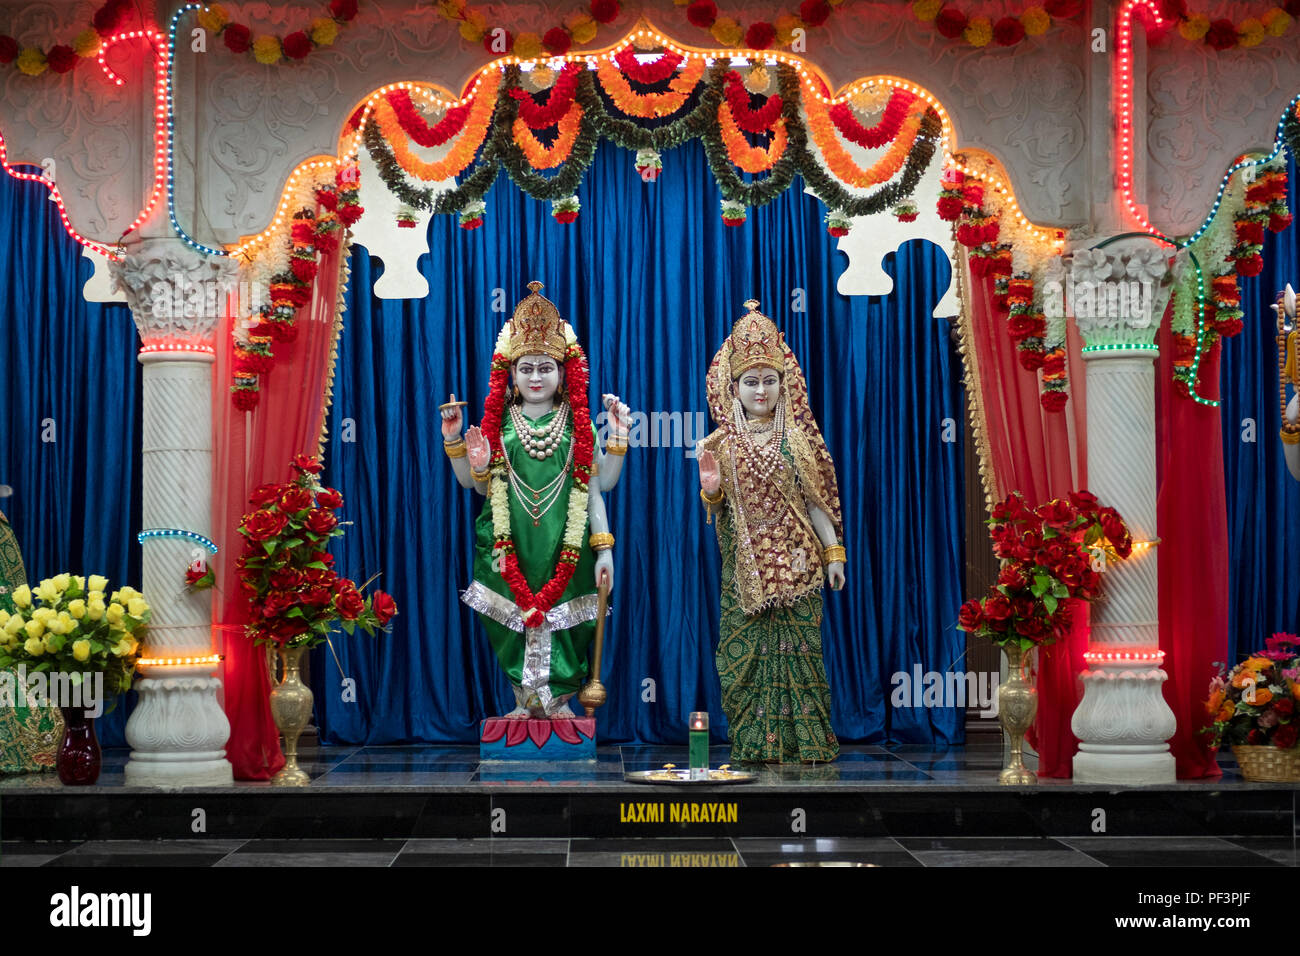 Statues of the Hindu deities Lakshmi and Narayan at a temple in Woodside, Queens, New York. Stock Photo